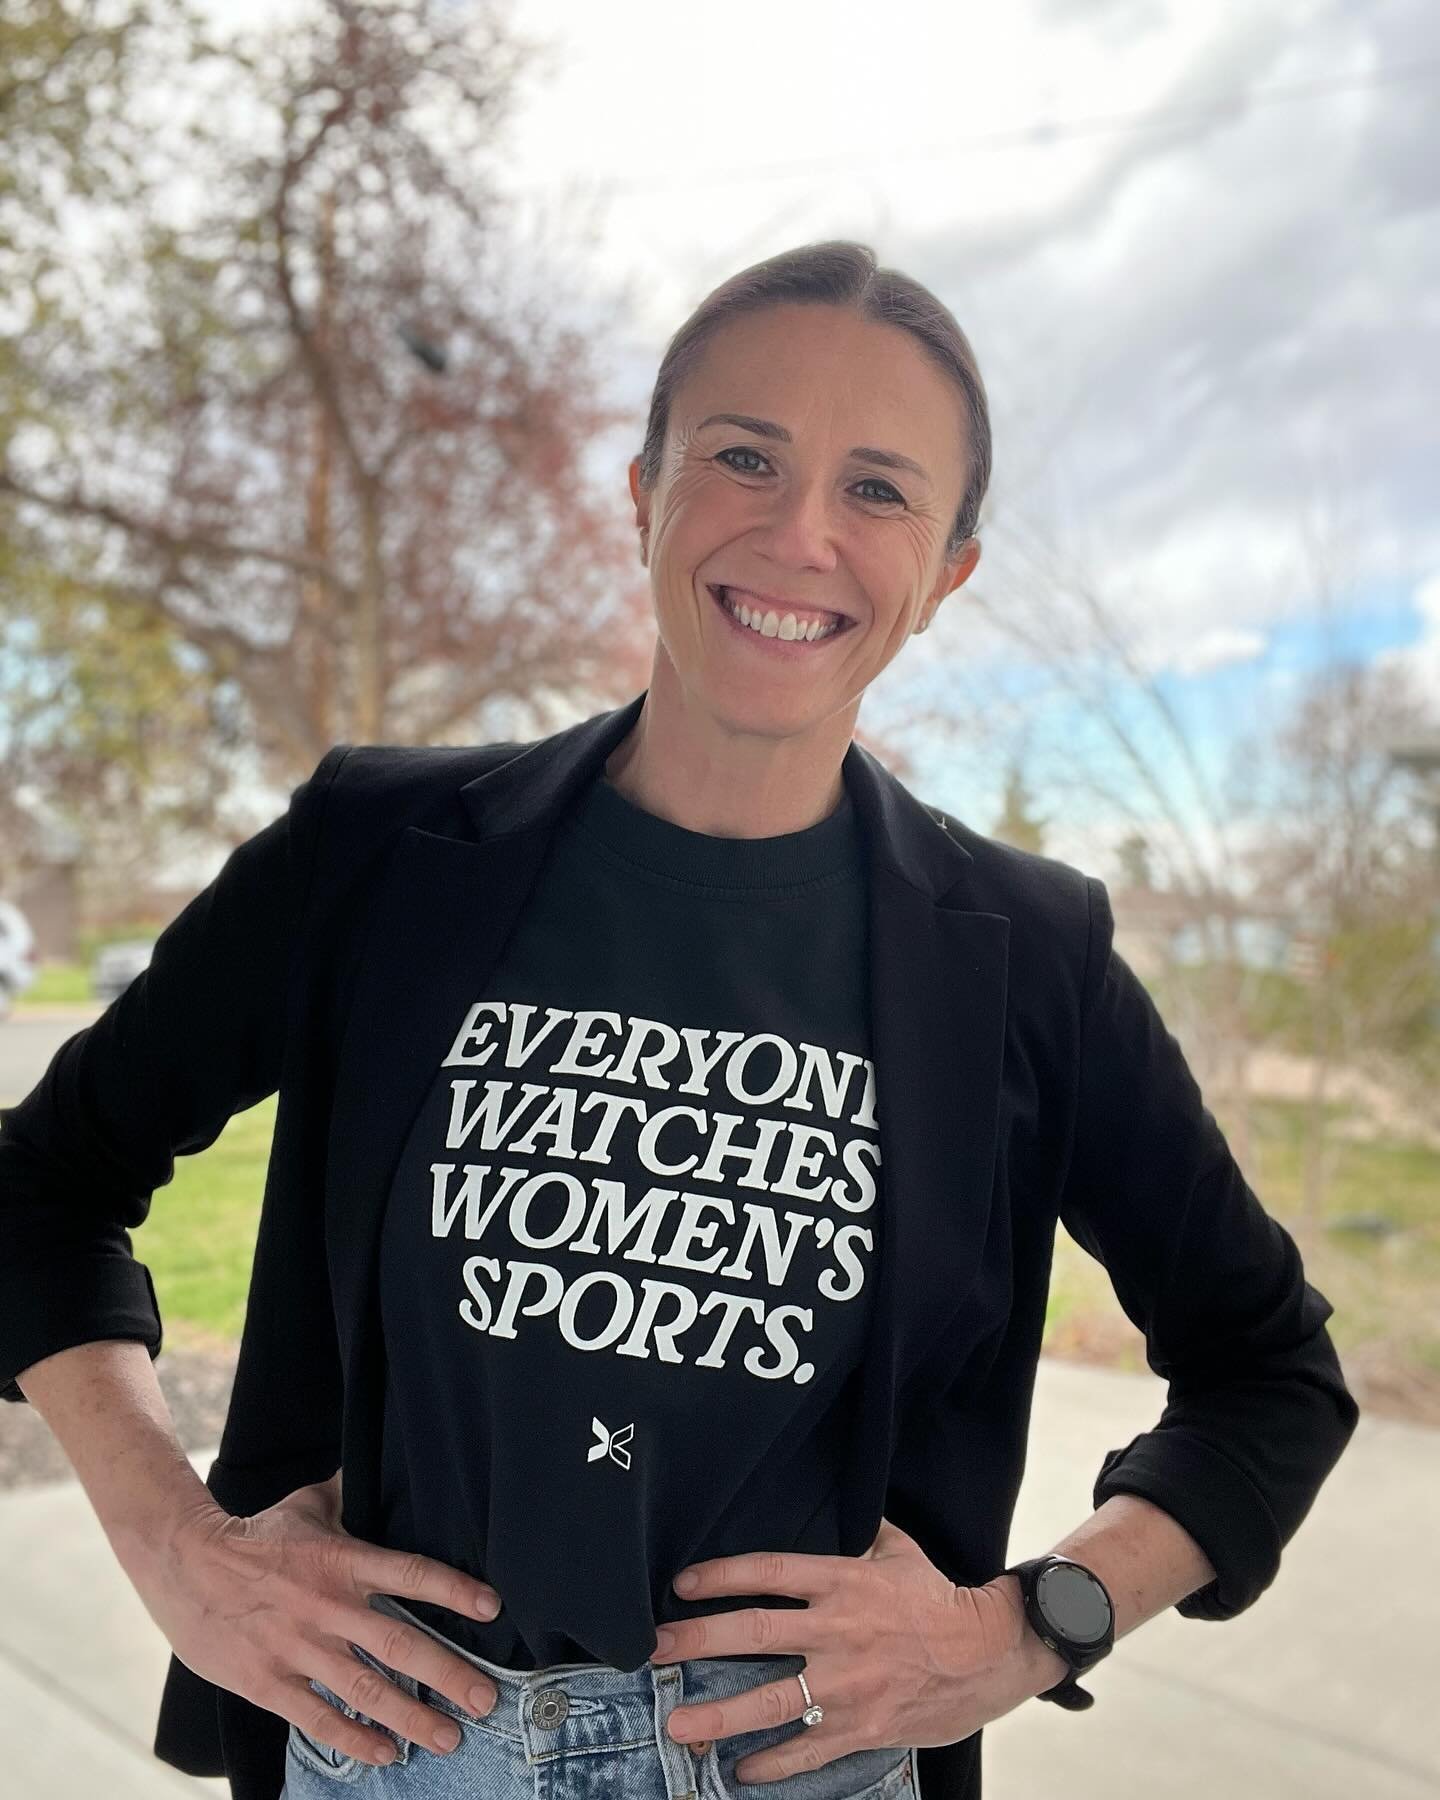 My new power suit. 

I did an enneagram presentation today and I felt the power repping @togethxr | @sbird10 . If you don&rsquo;t know, now you know ⬆️. 

⚡️⚡️⚡️

#togethxr #everyonewatcheswomenssports #womenssports #suebird